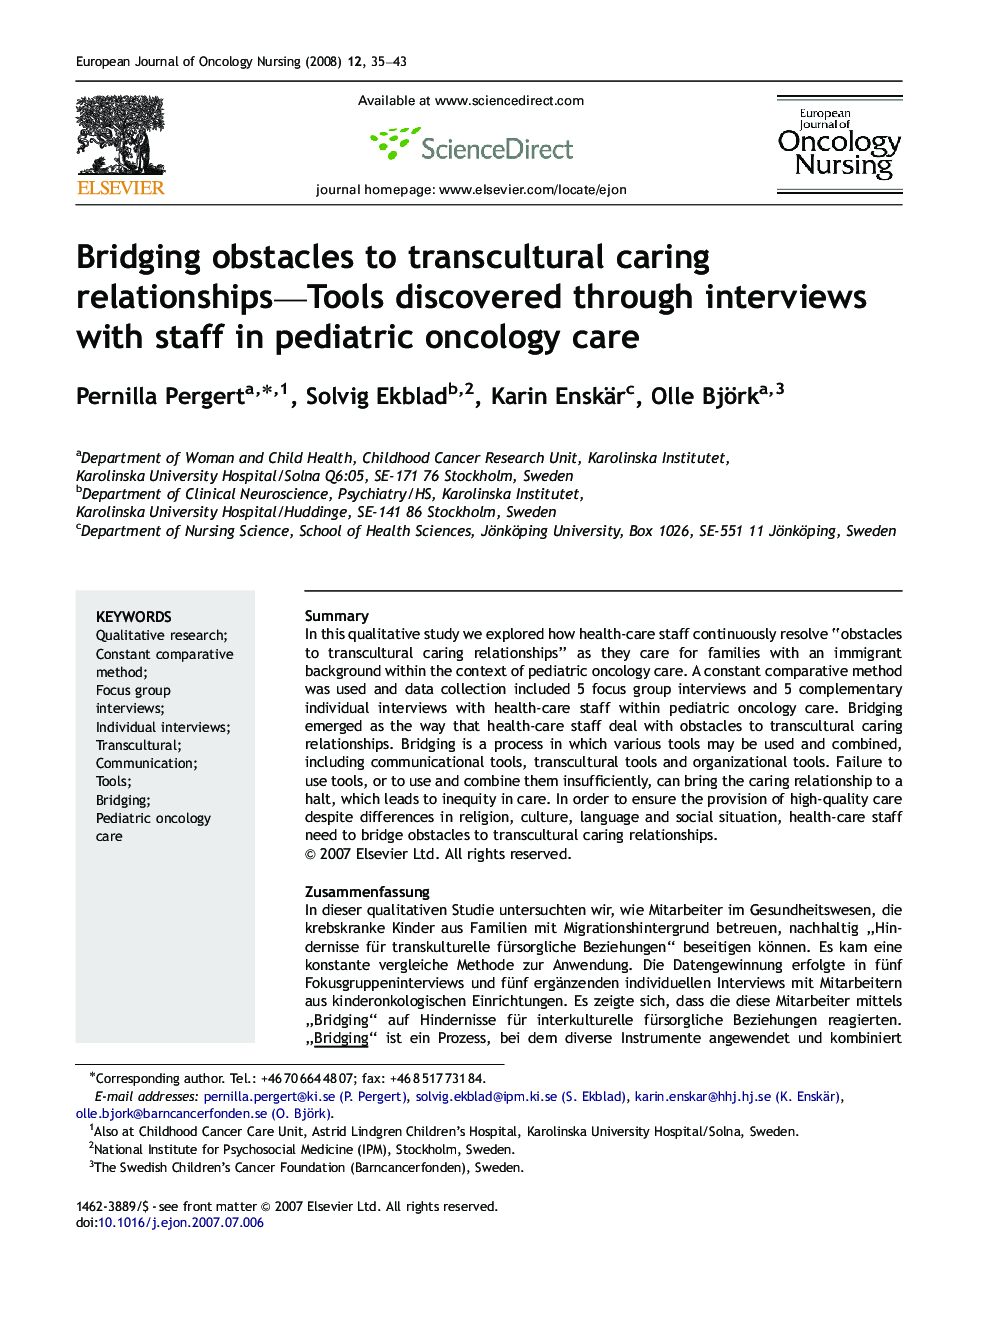 Bridging obstacles to transcultural caring relationships—Tools discovered through interviews with staff in pediatric oncology care